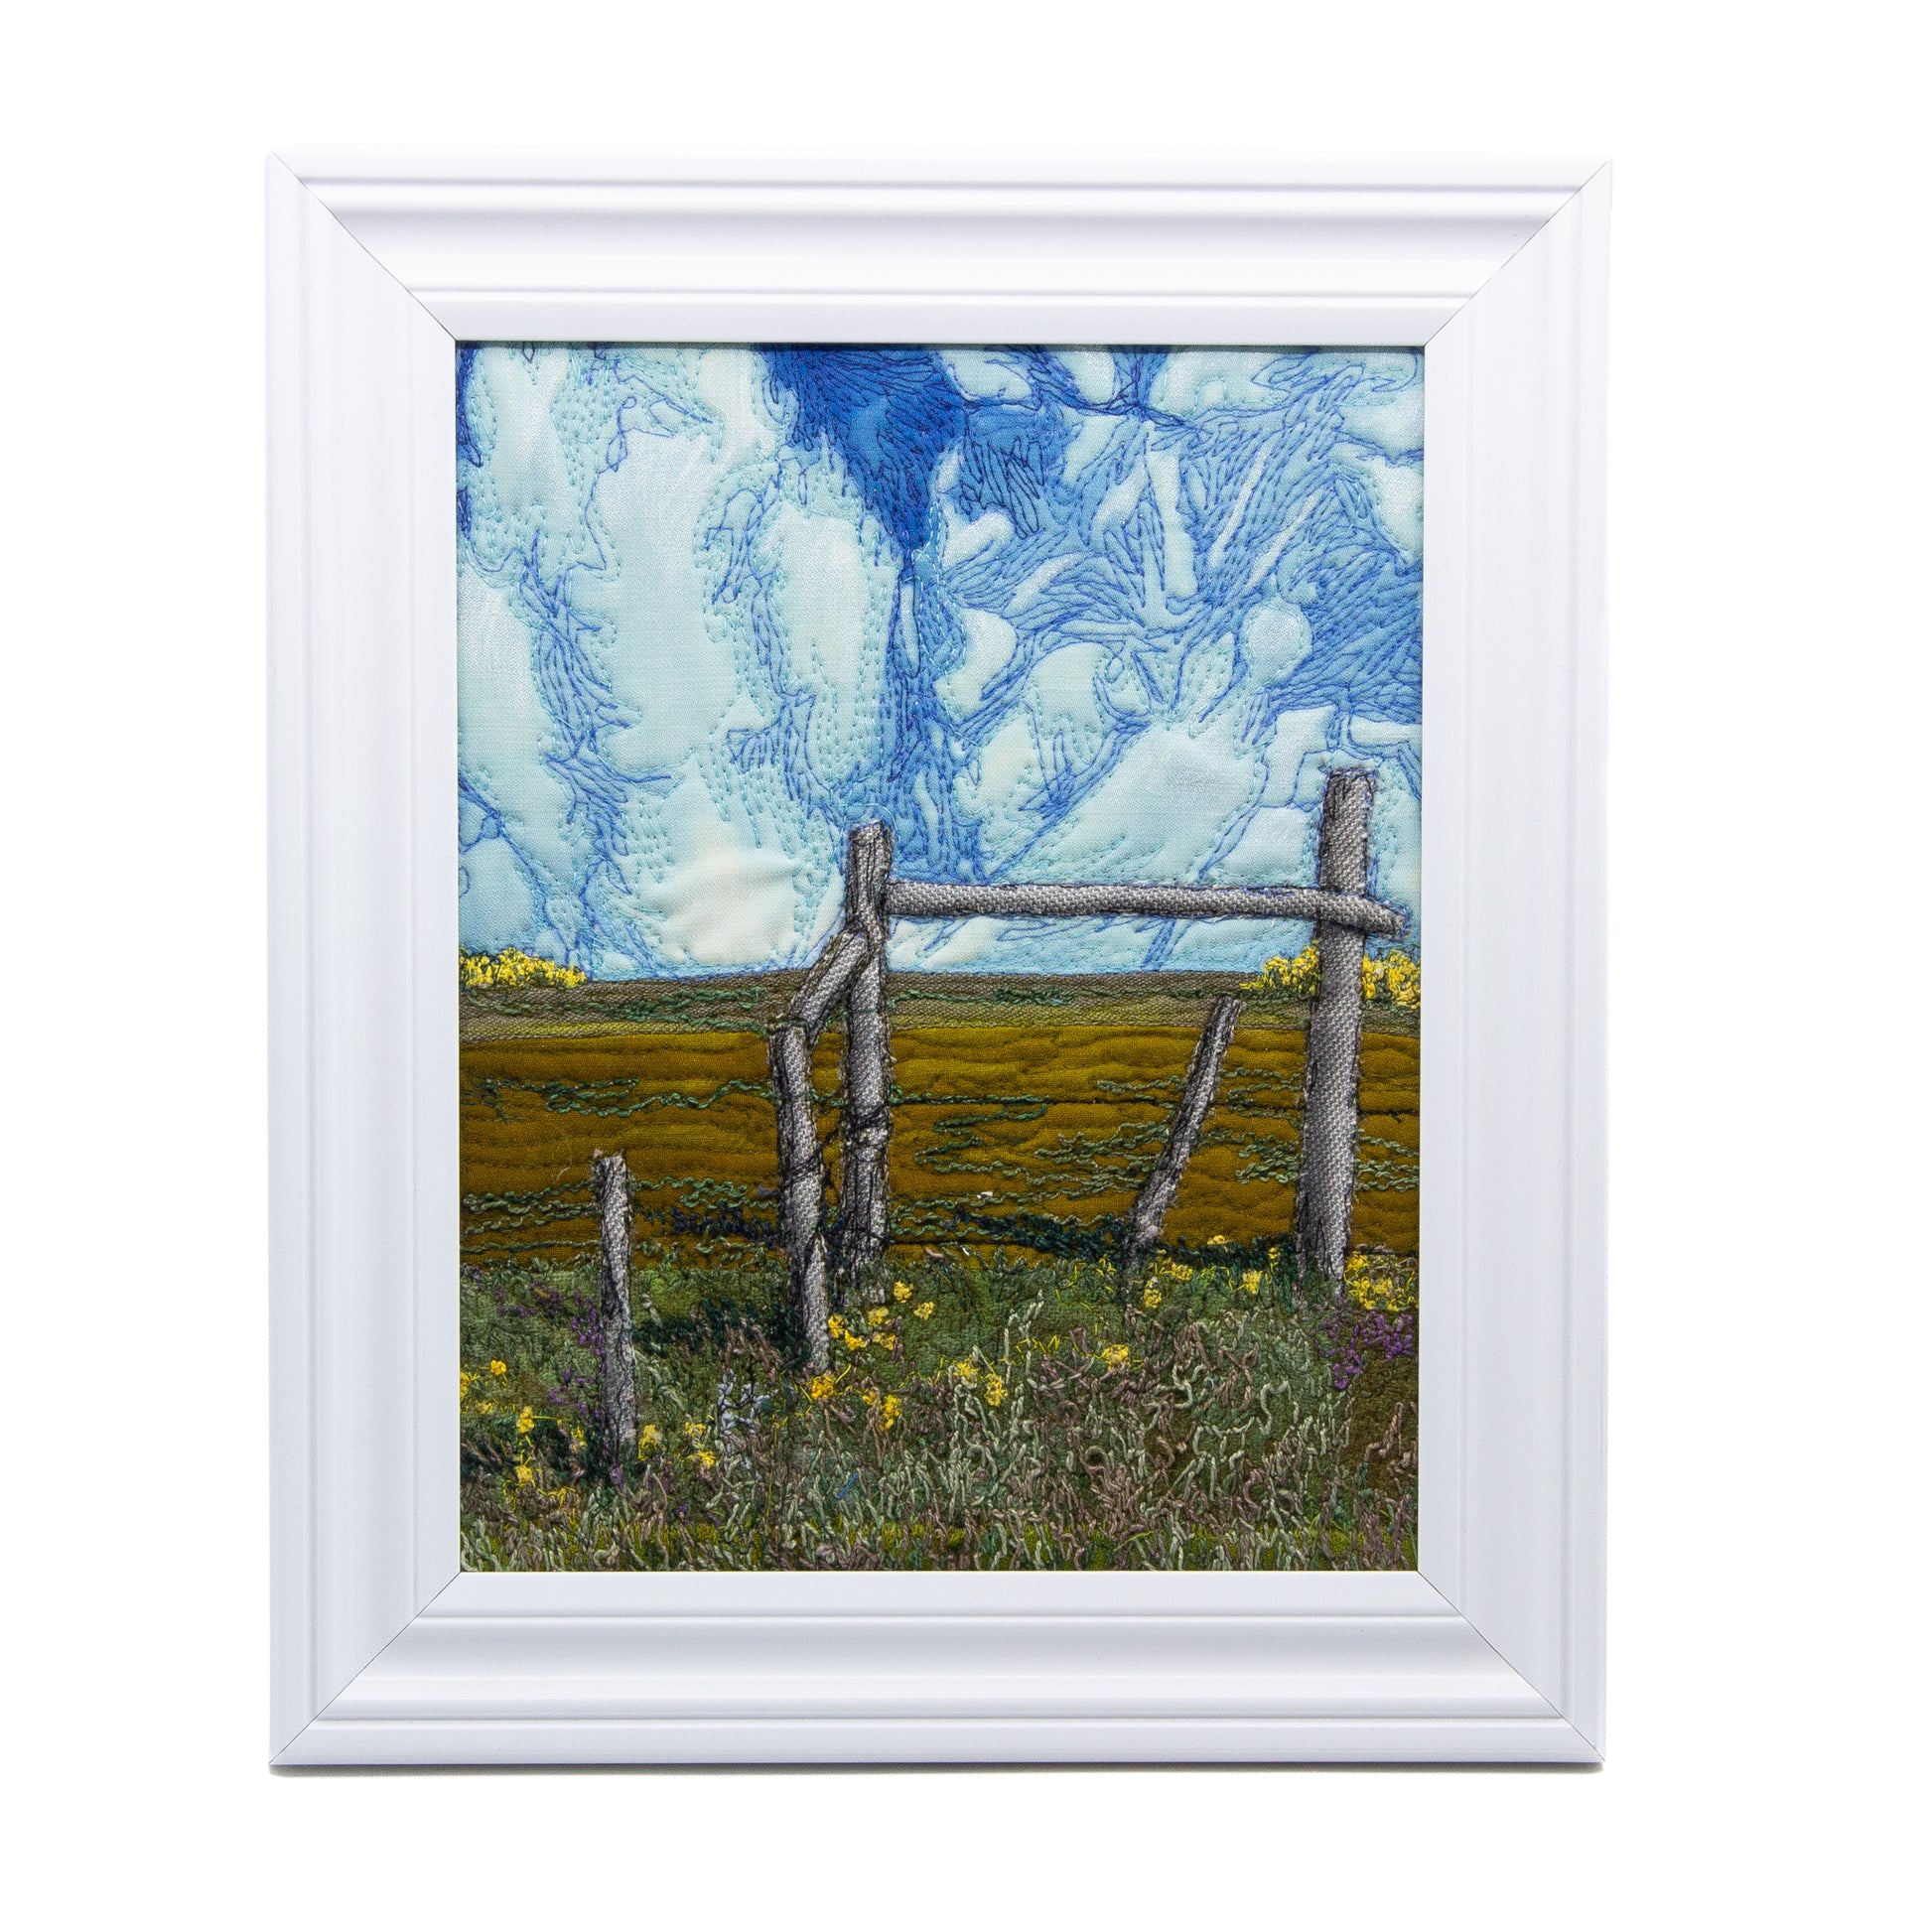 Thread embriodered painting of a fence in a prairie landscape 